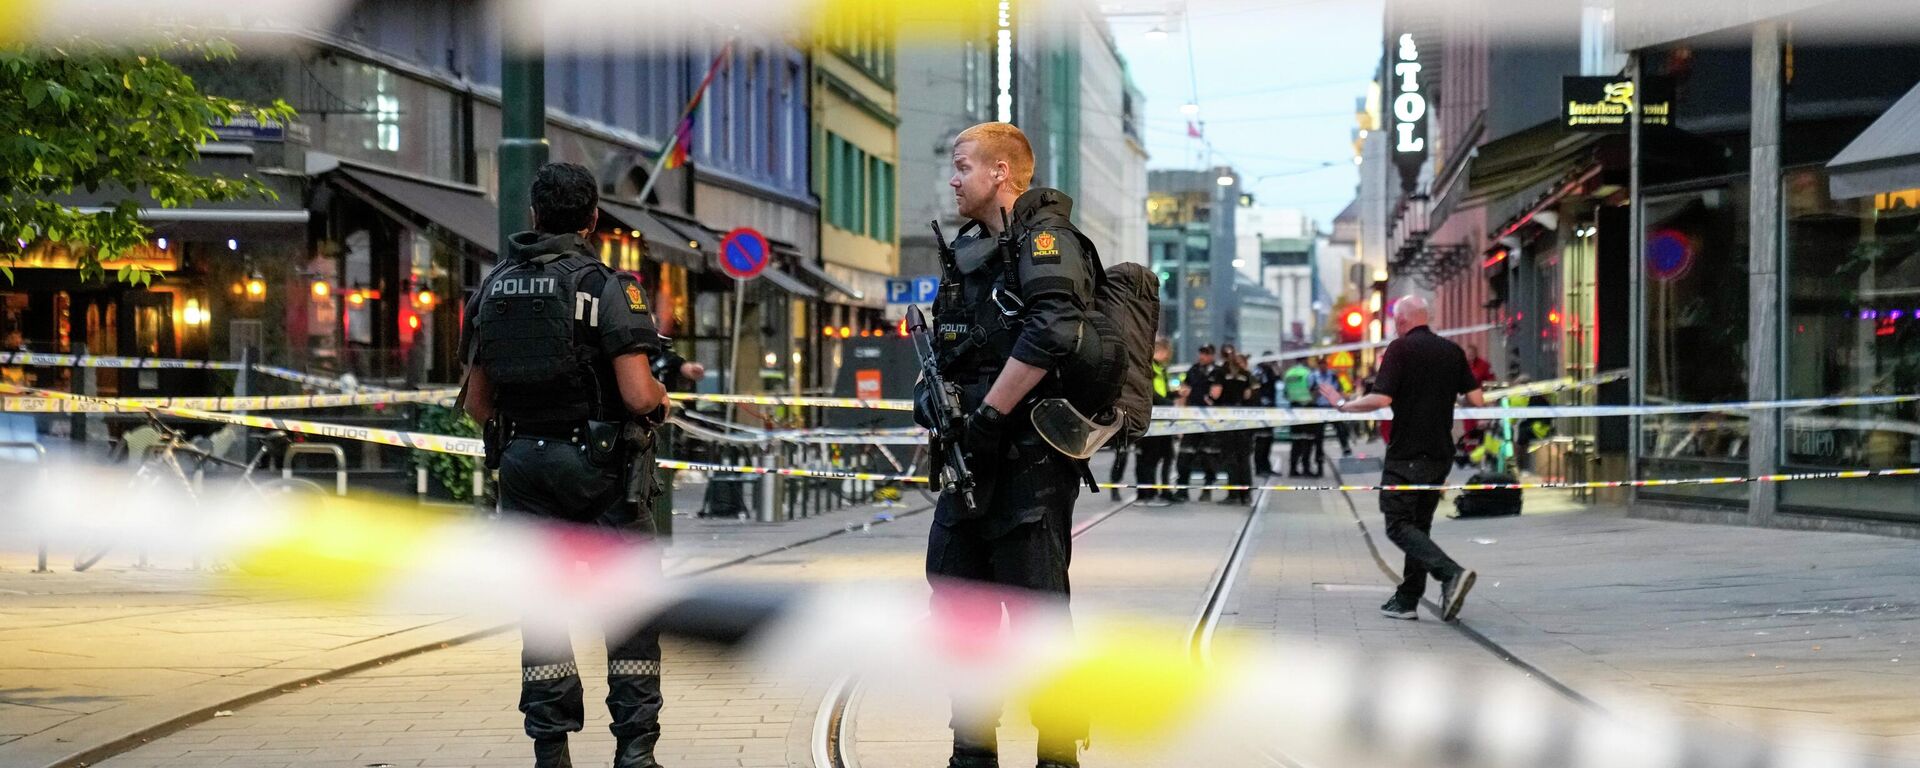 Norwegian police officers stand guard in the streets of central Oslo between security tape lines, on June 25, 2022, after shots were fired outside the London pub, killing two people. - Sputnik International, 1920, 25.06.2022